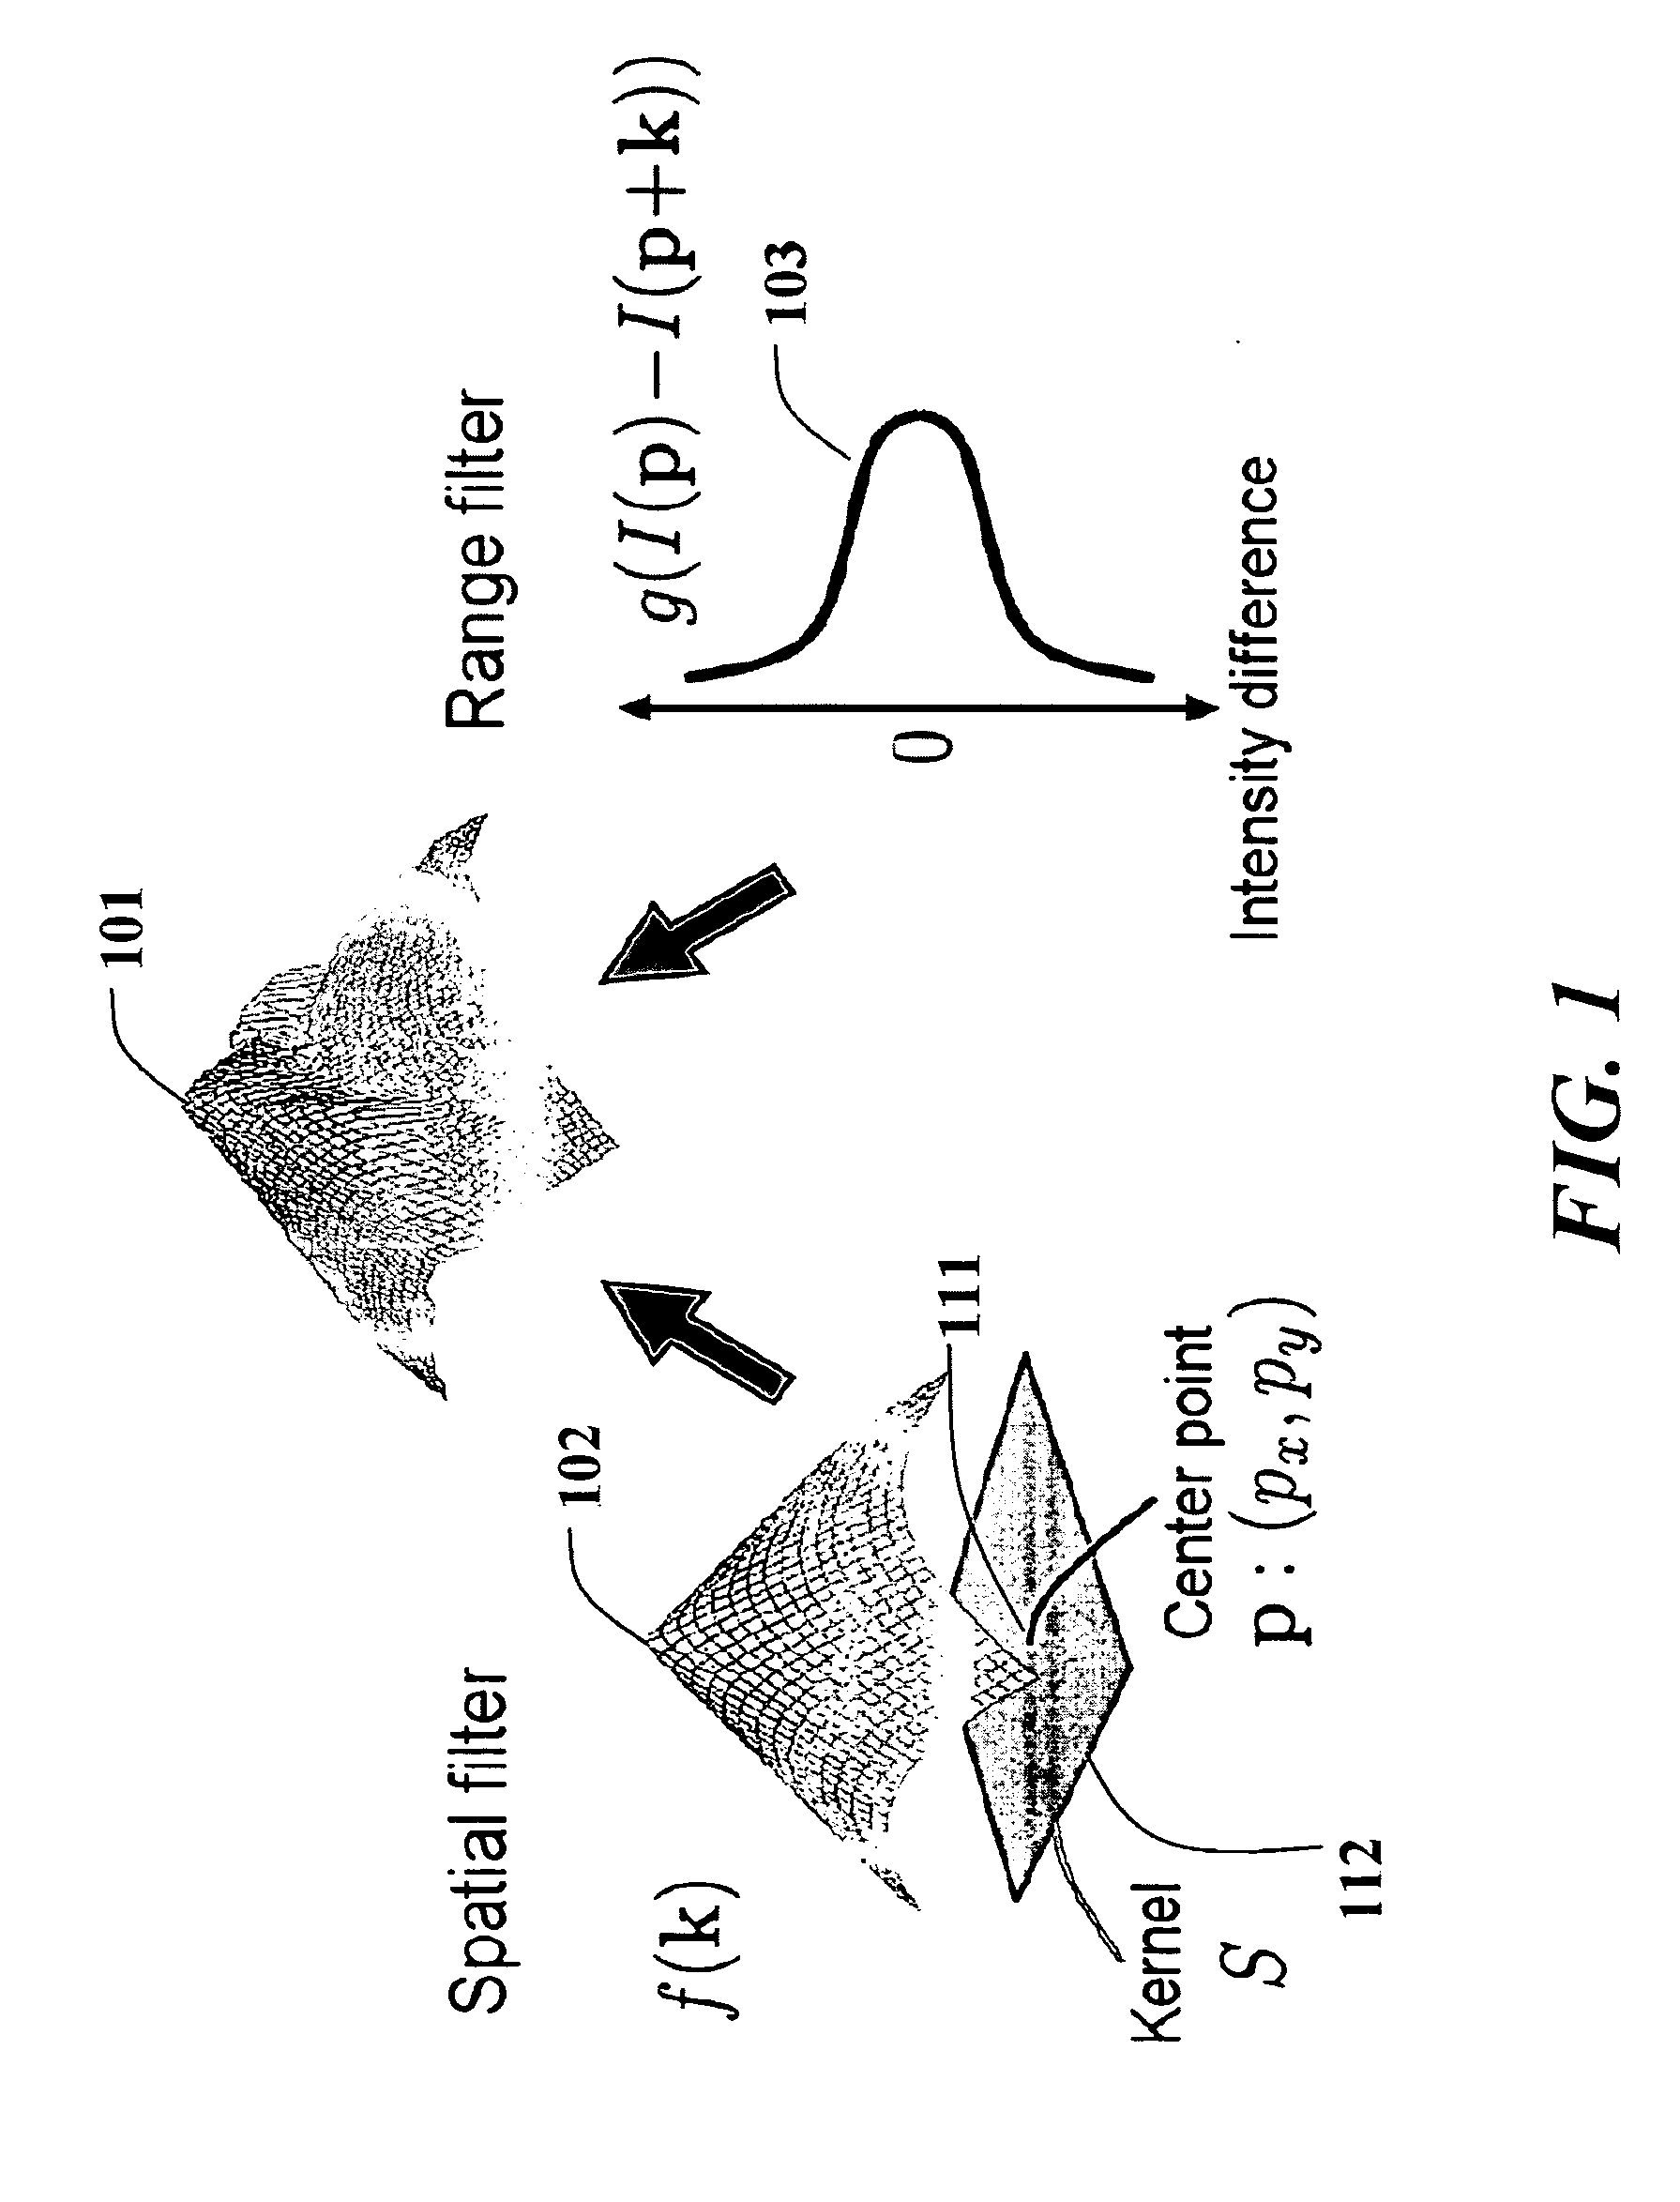 Method for Filtering of Images with Bilateral Filters and Integral Histograms